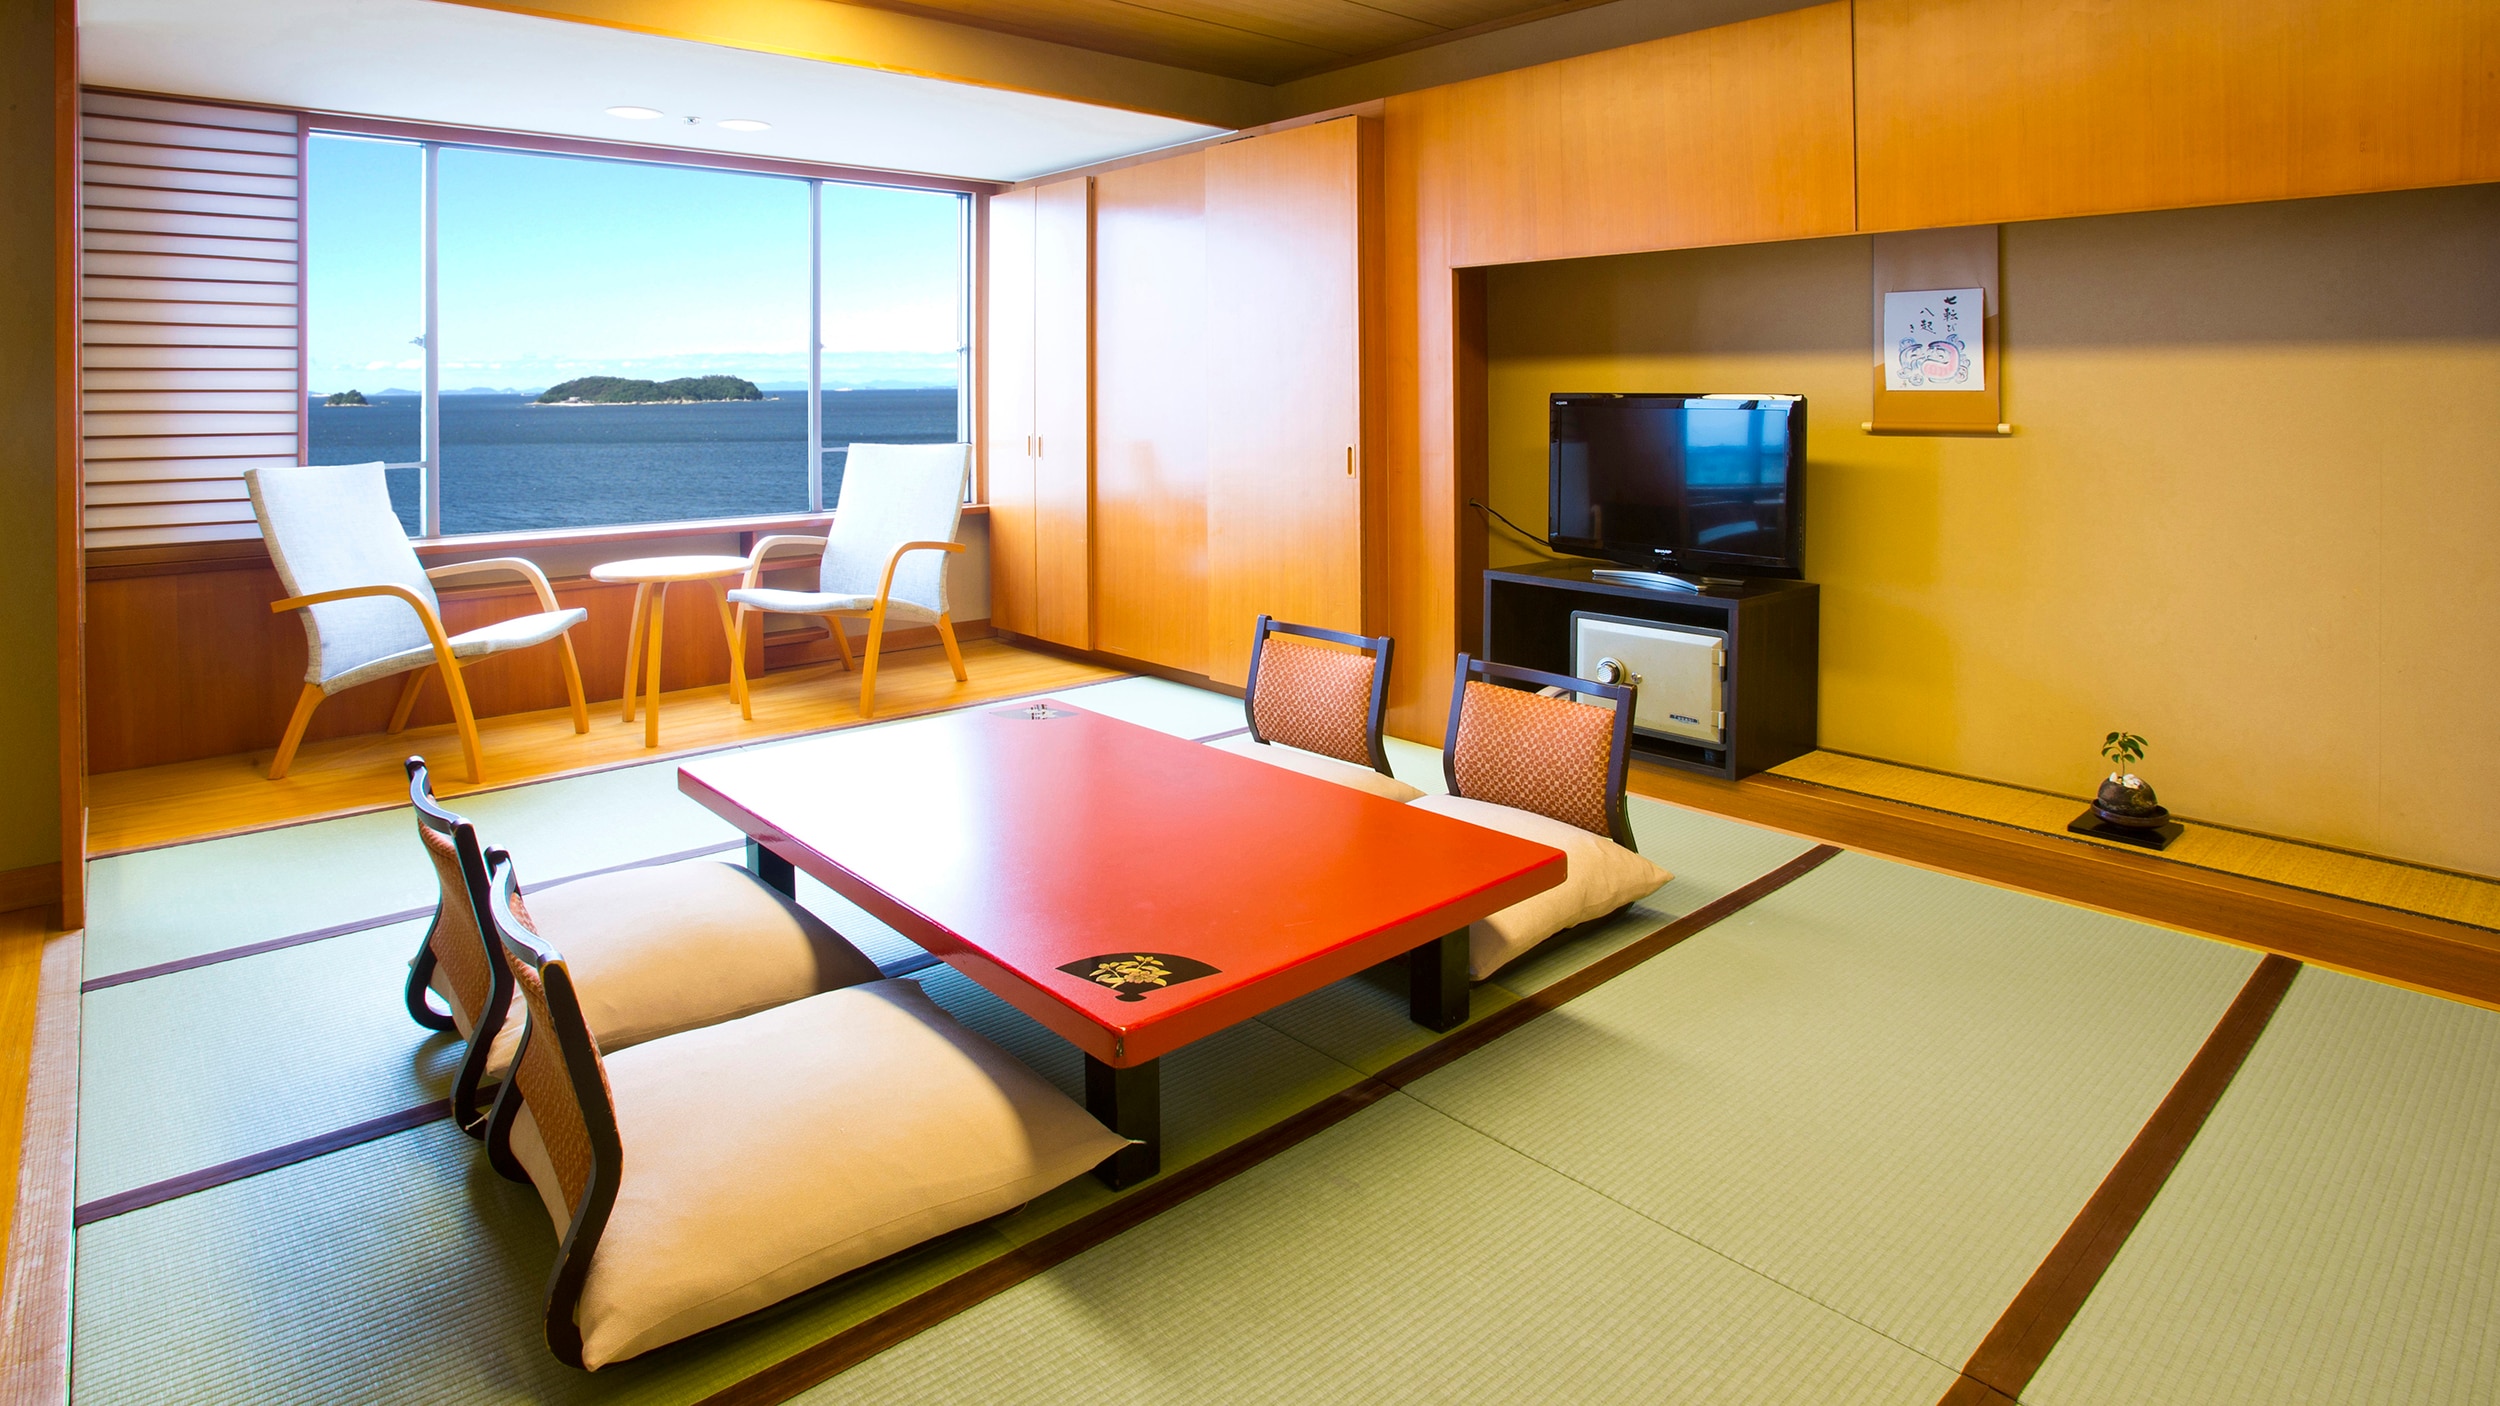 An example of a guest room in the west building with an ocean view